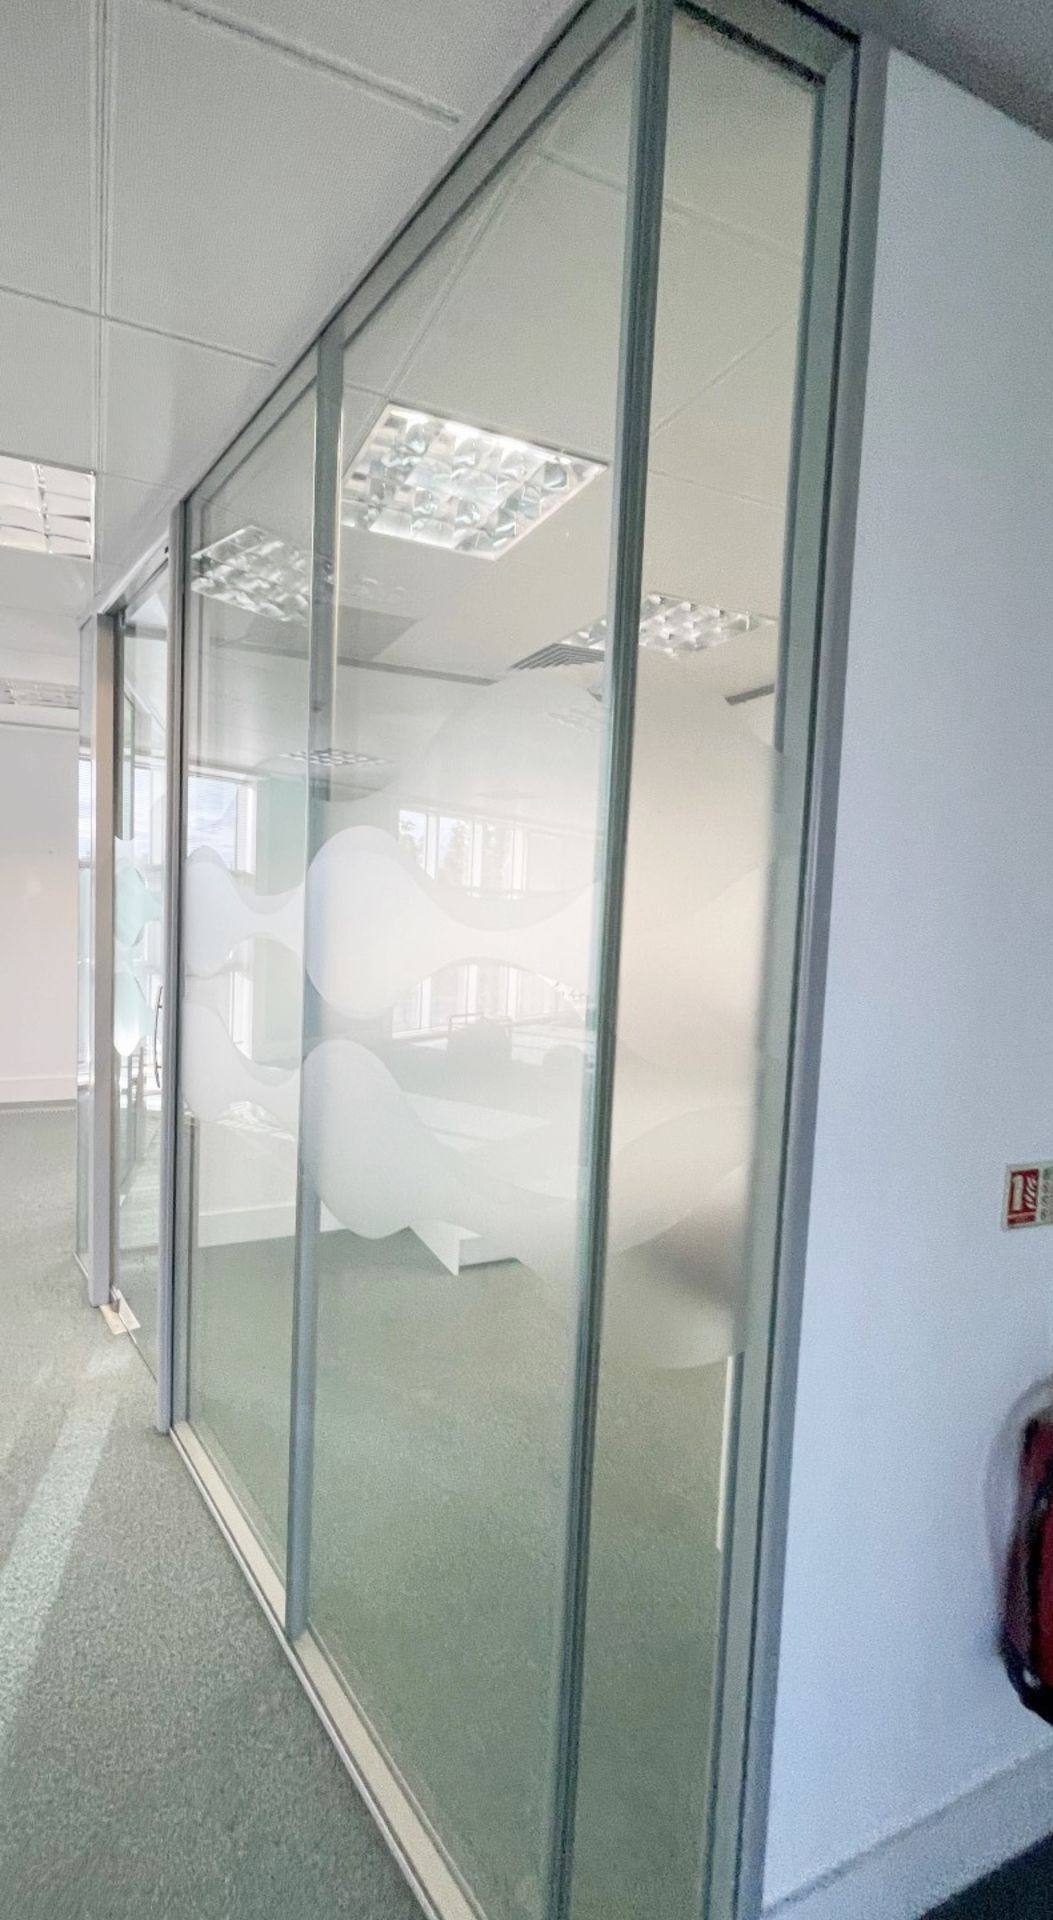 9 x Assorted Glass Office Dividers Panels With 2 x Glass Doors - Currently Covering 2 Offices - Image 3 of 11